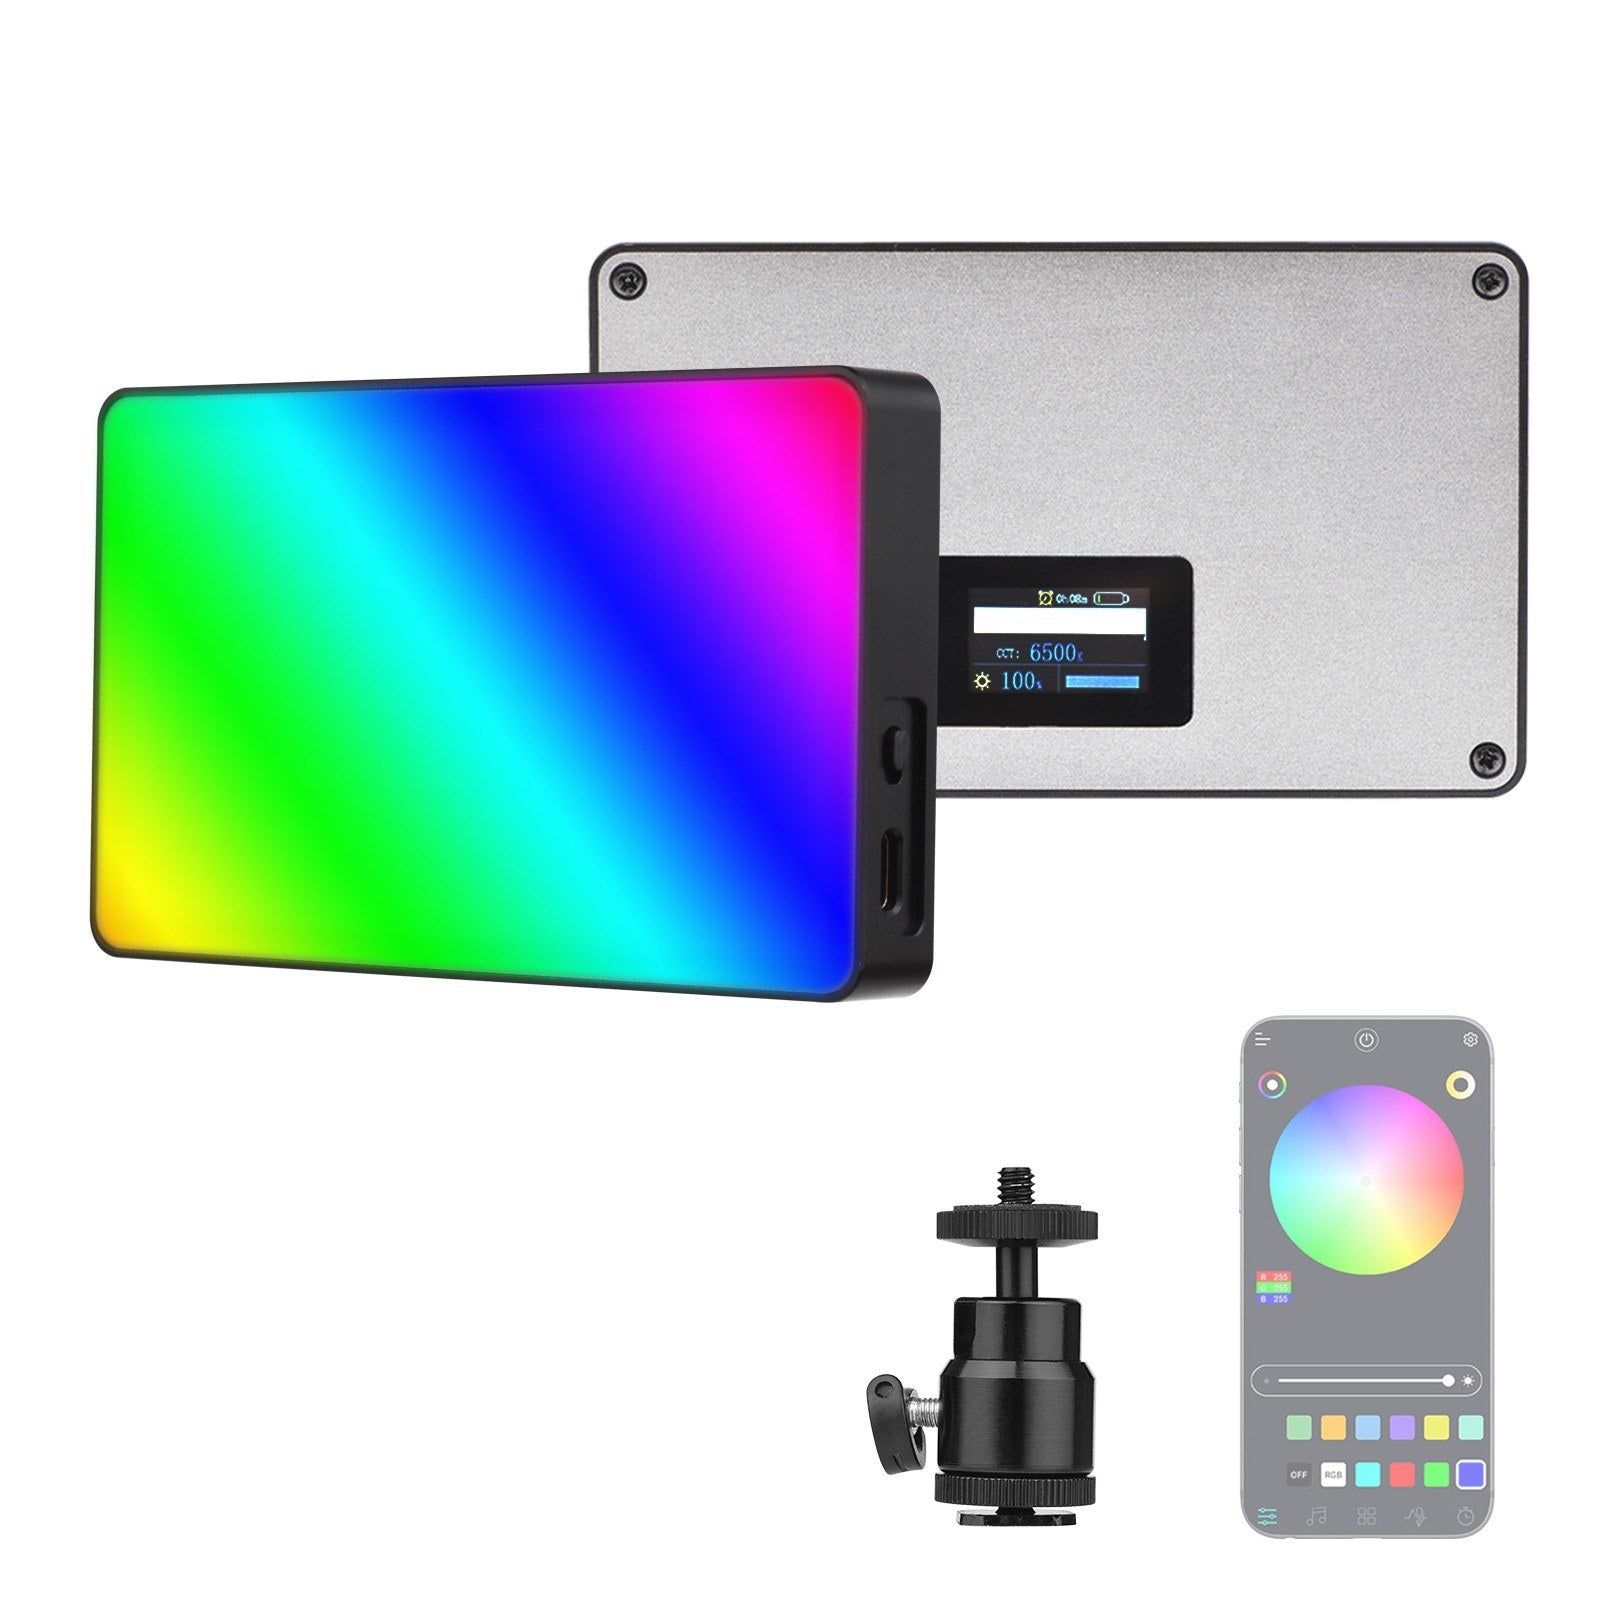 Andoer APP Control 360-degree Full Color RGB Photography Light Lightweight Professional LED Video Light Bi-Color Temperature 3000K-6500K Dimmable Brightness with Grid Soft Cover Storage Bag